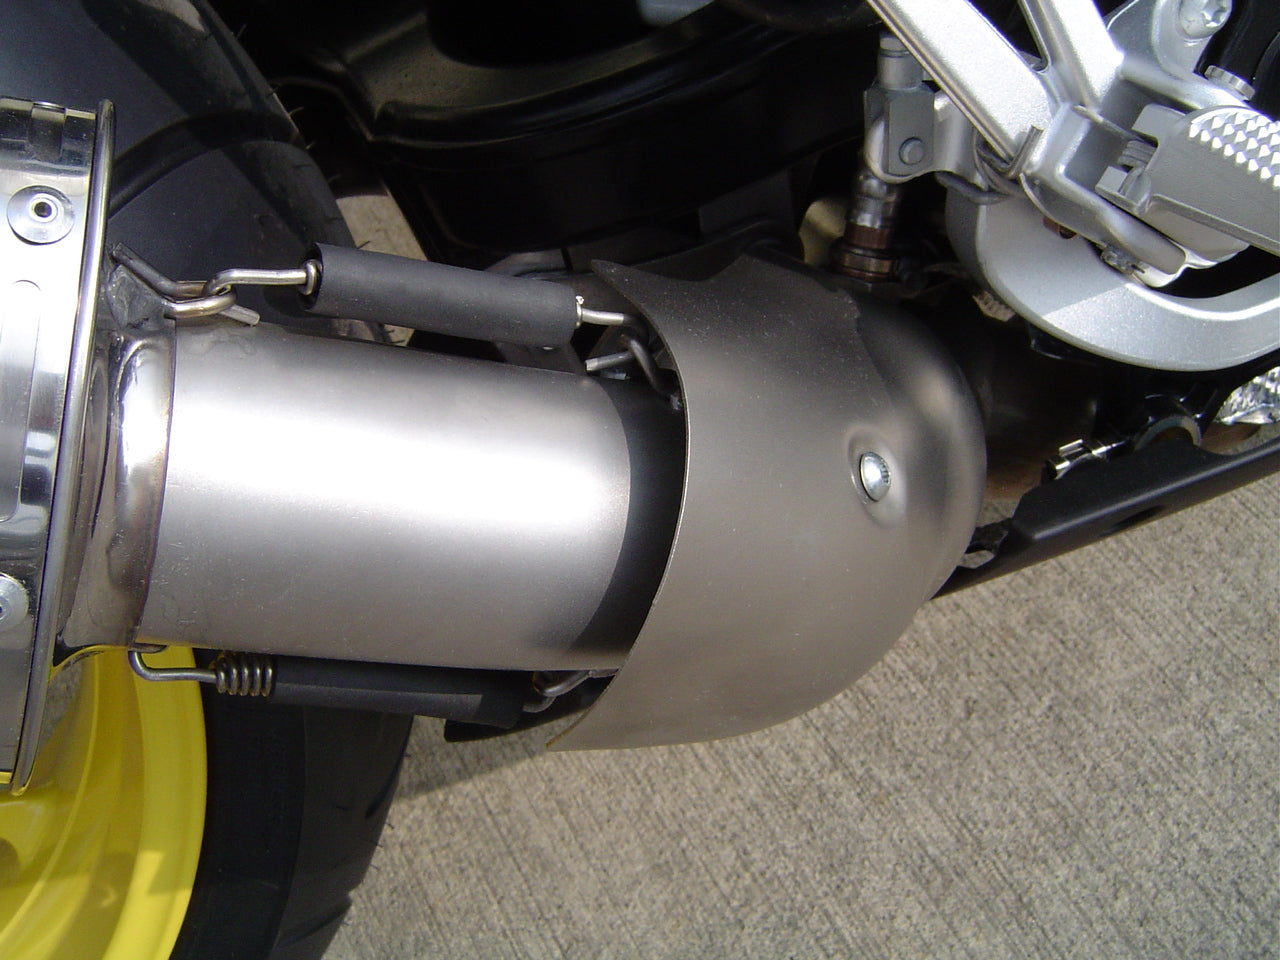 GPR Exhaust for Bmw K1200GT 2006-2008, Gpe Ann. titanium, Slip-on Exhaust Including Removable DB Killer and Link Pipe